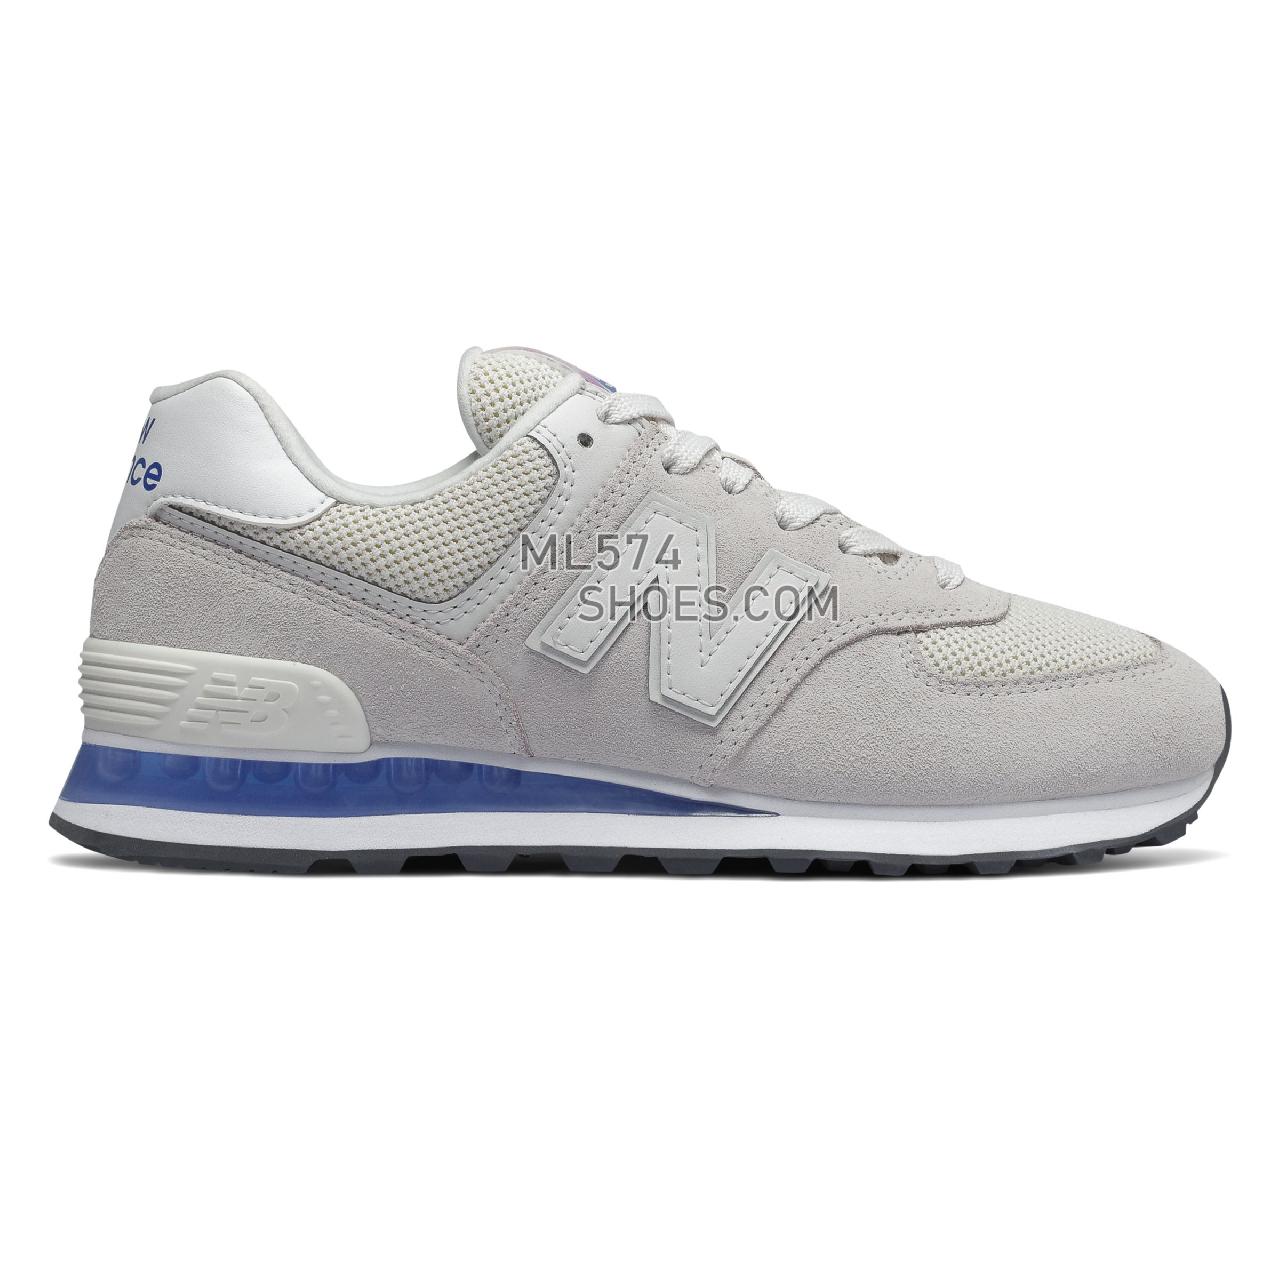 New Balance 574 - Women's Classic Sneakers - White with UV Blue - WL574NPD